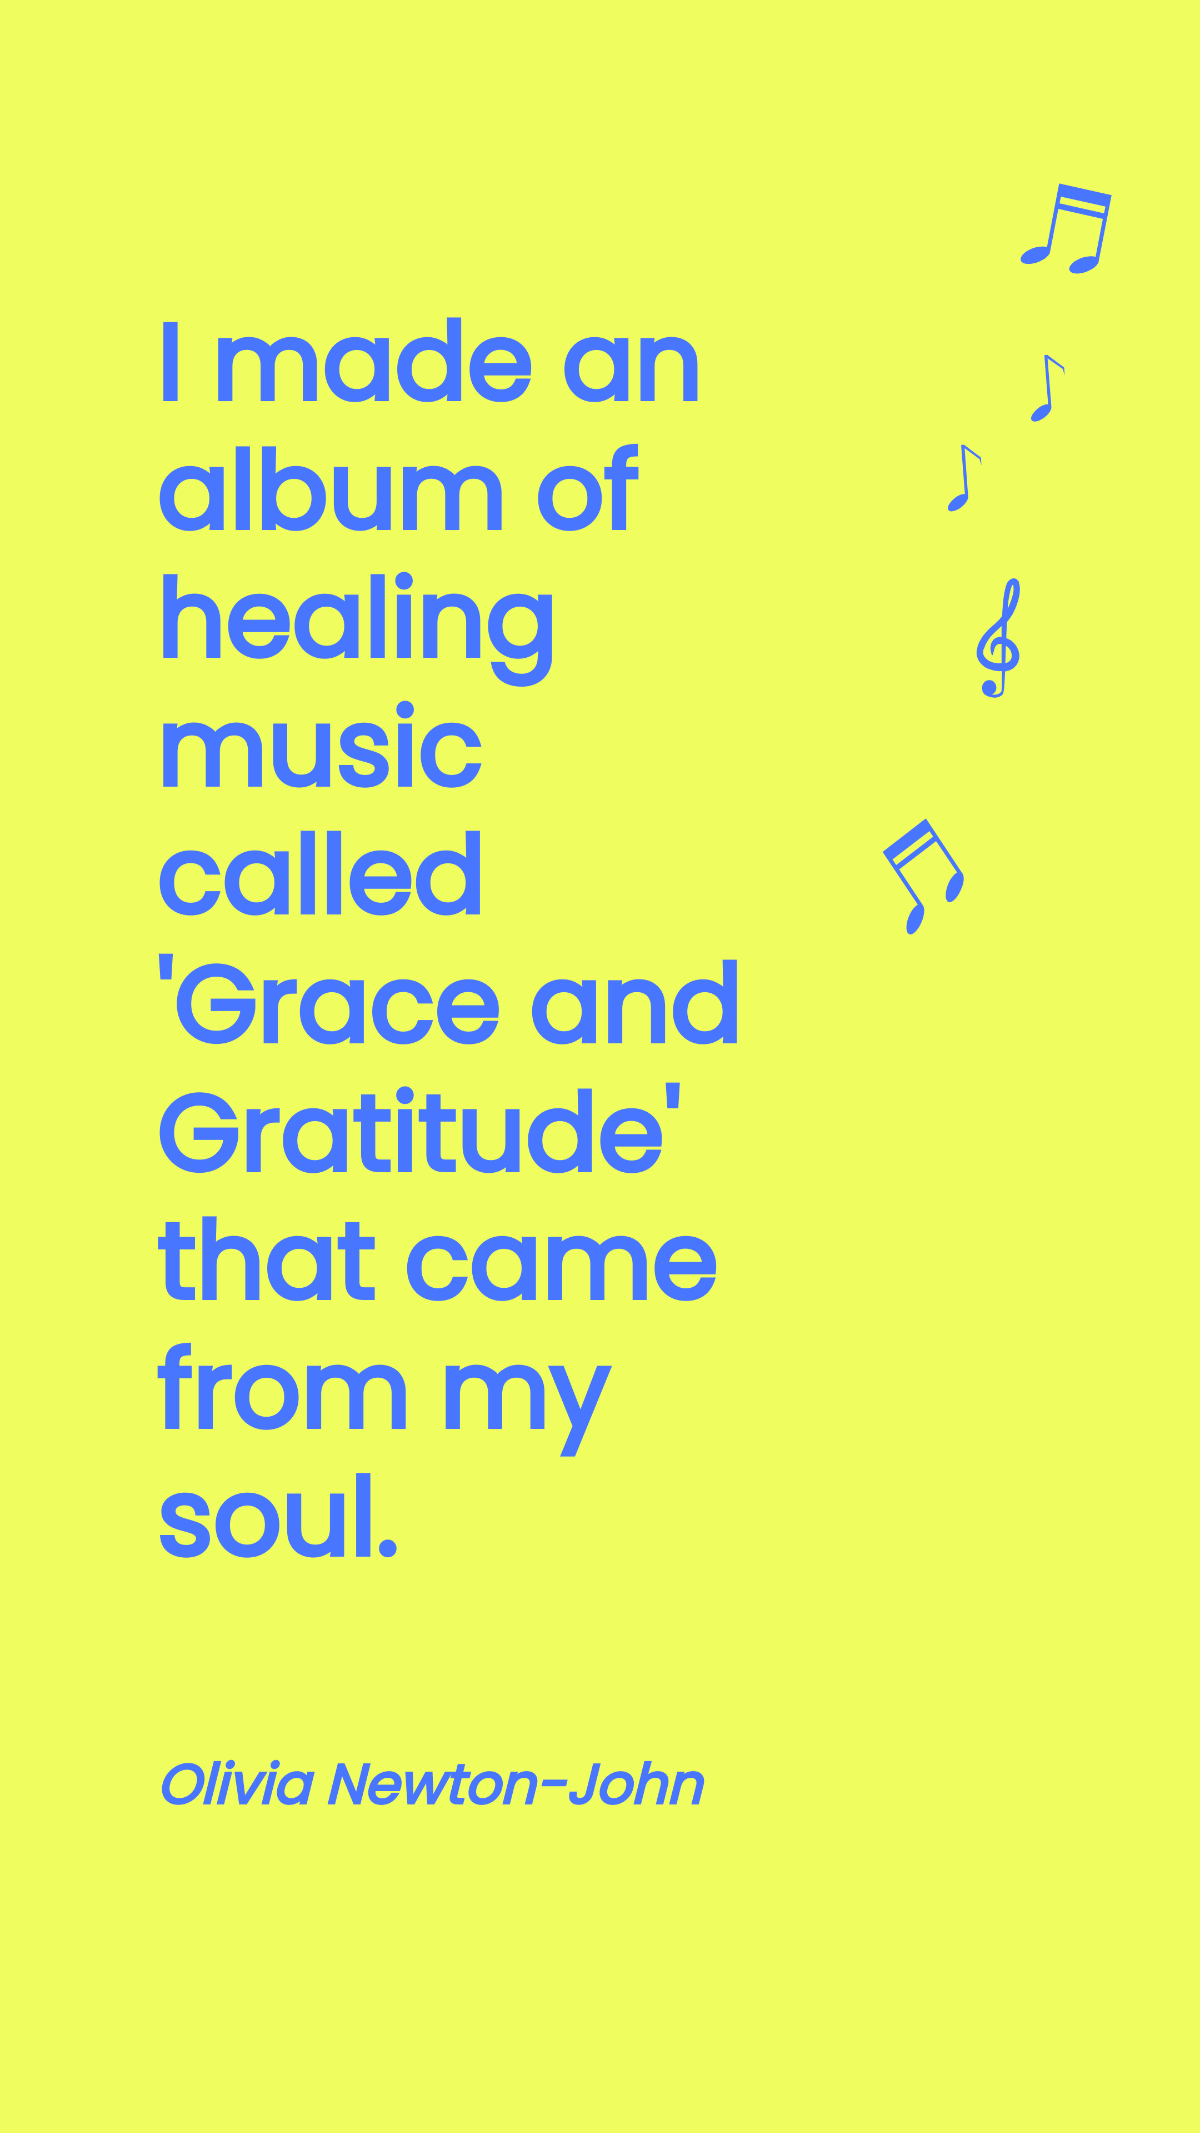 Olivia Newton-John - I made an album of healing music called 'Grace and Gratitude' that came from my soul.